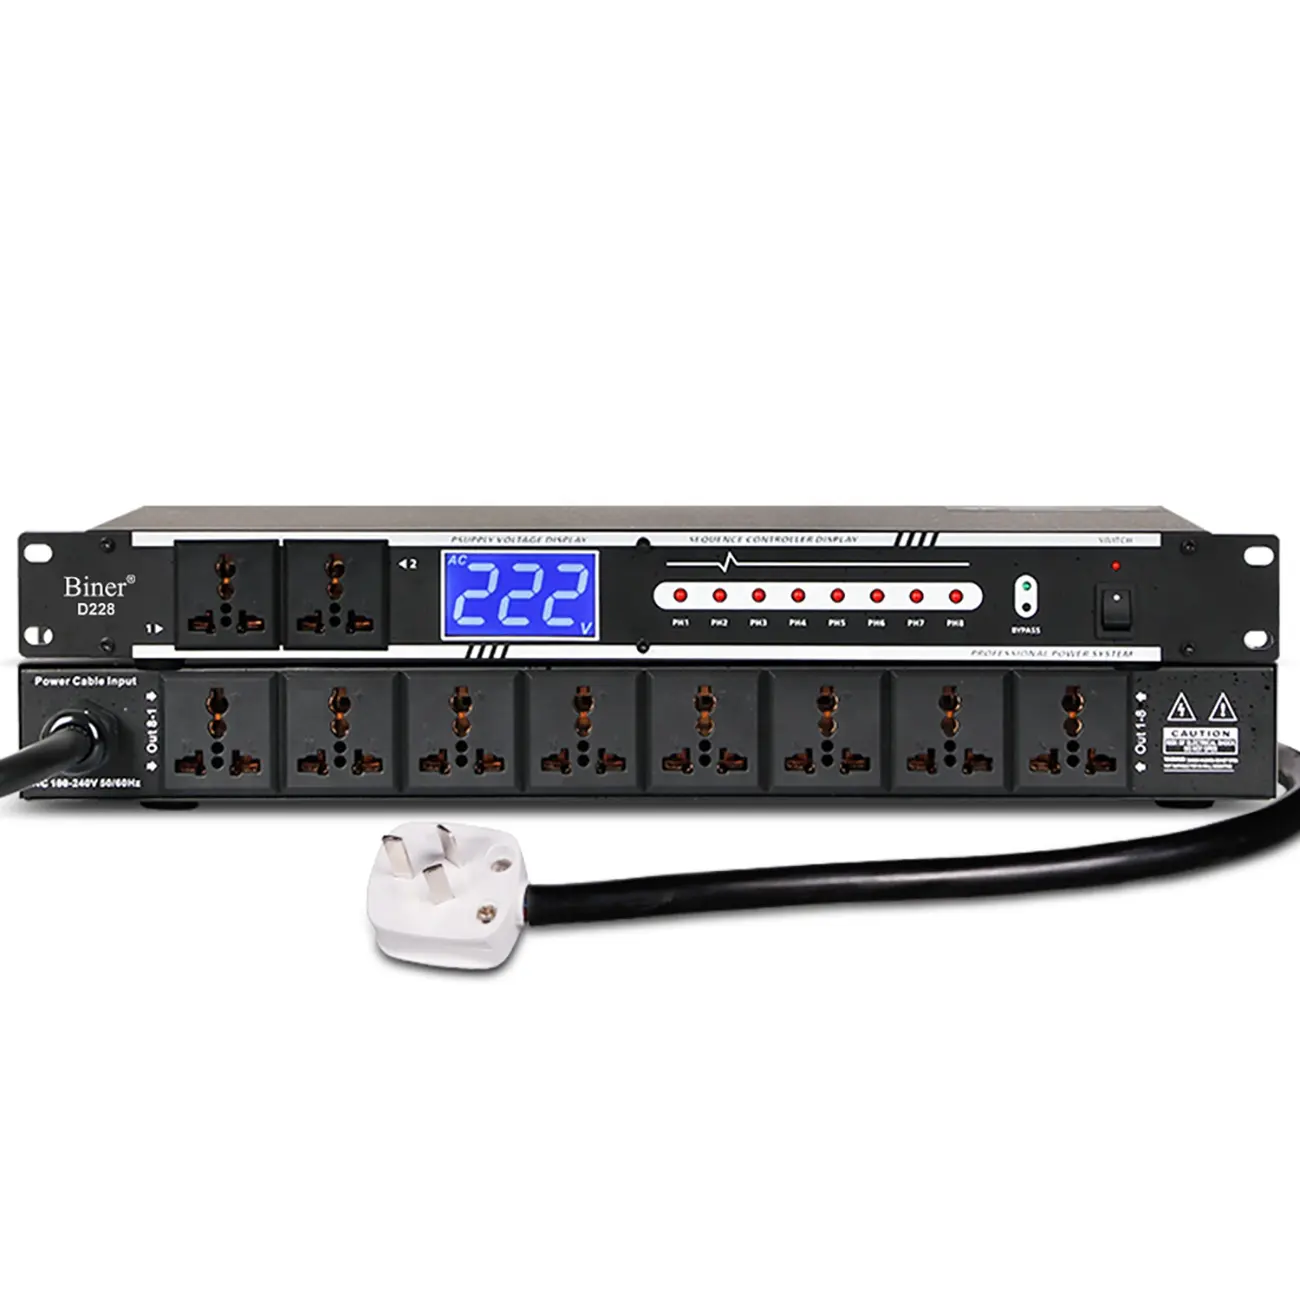 Biner D228 Professional power sequence 10 channel audio sequencer With voltage display For ktv live sound stage equipment